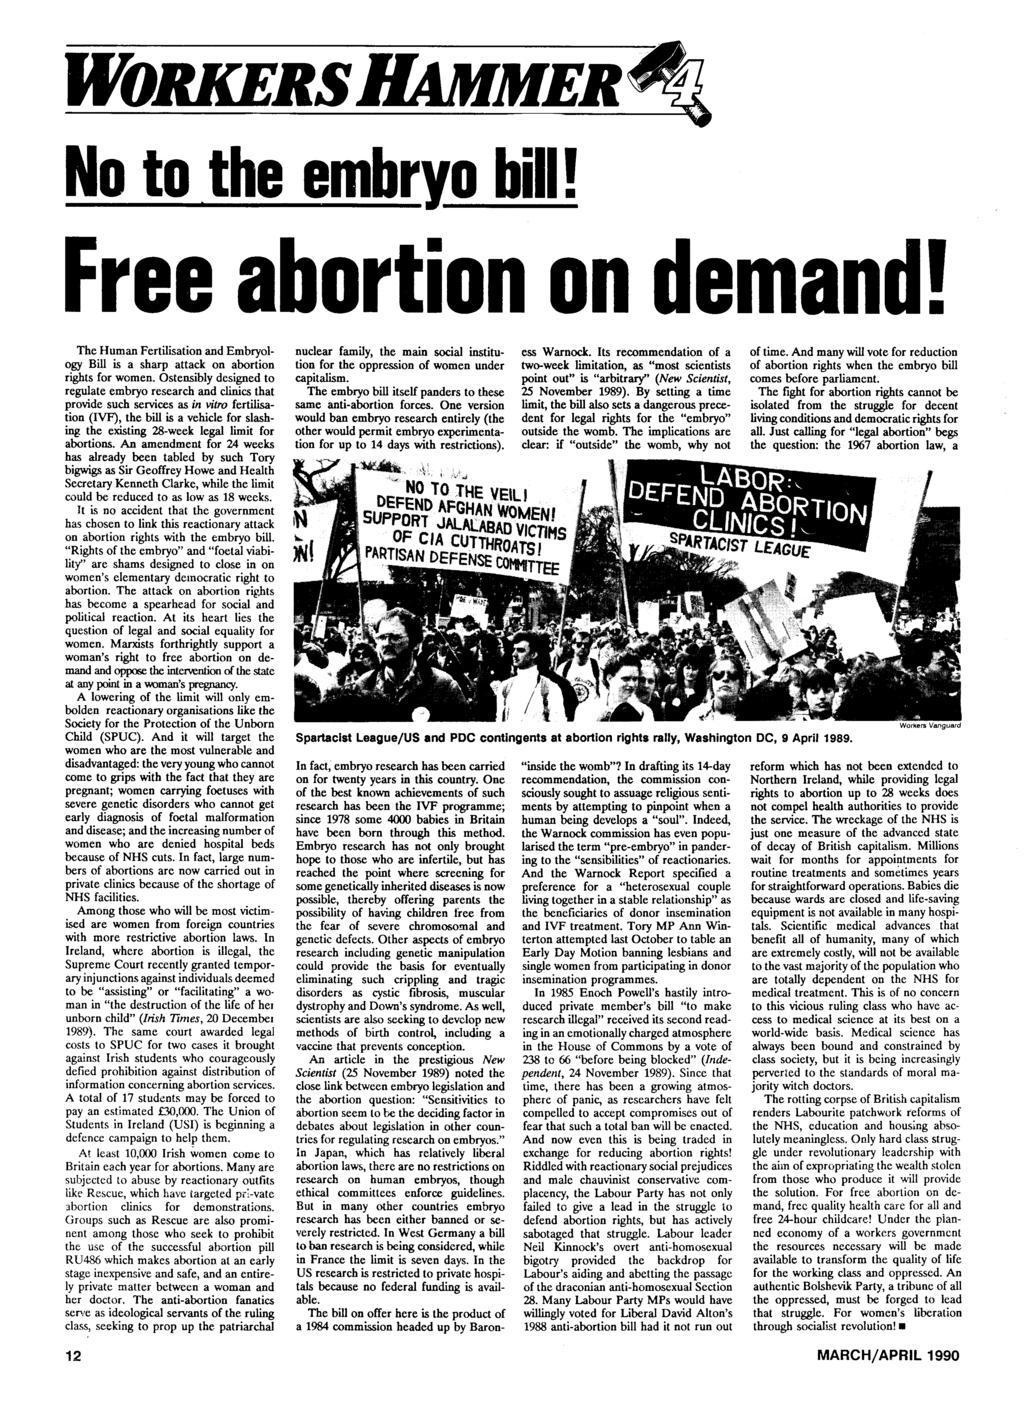 WORKERS No to the embryo bill! Free abortion on demand! The Human Fertilisation and Embryology Bill is a sharp attack on abortion rights for women.